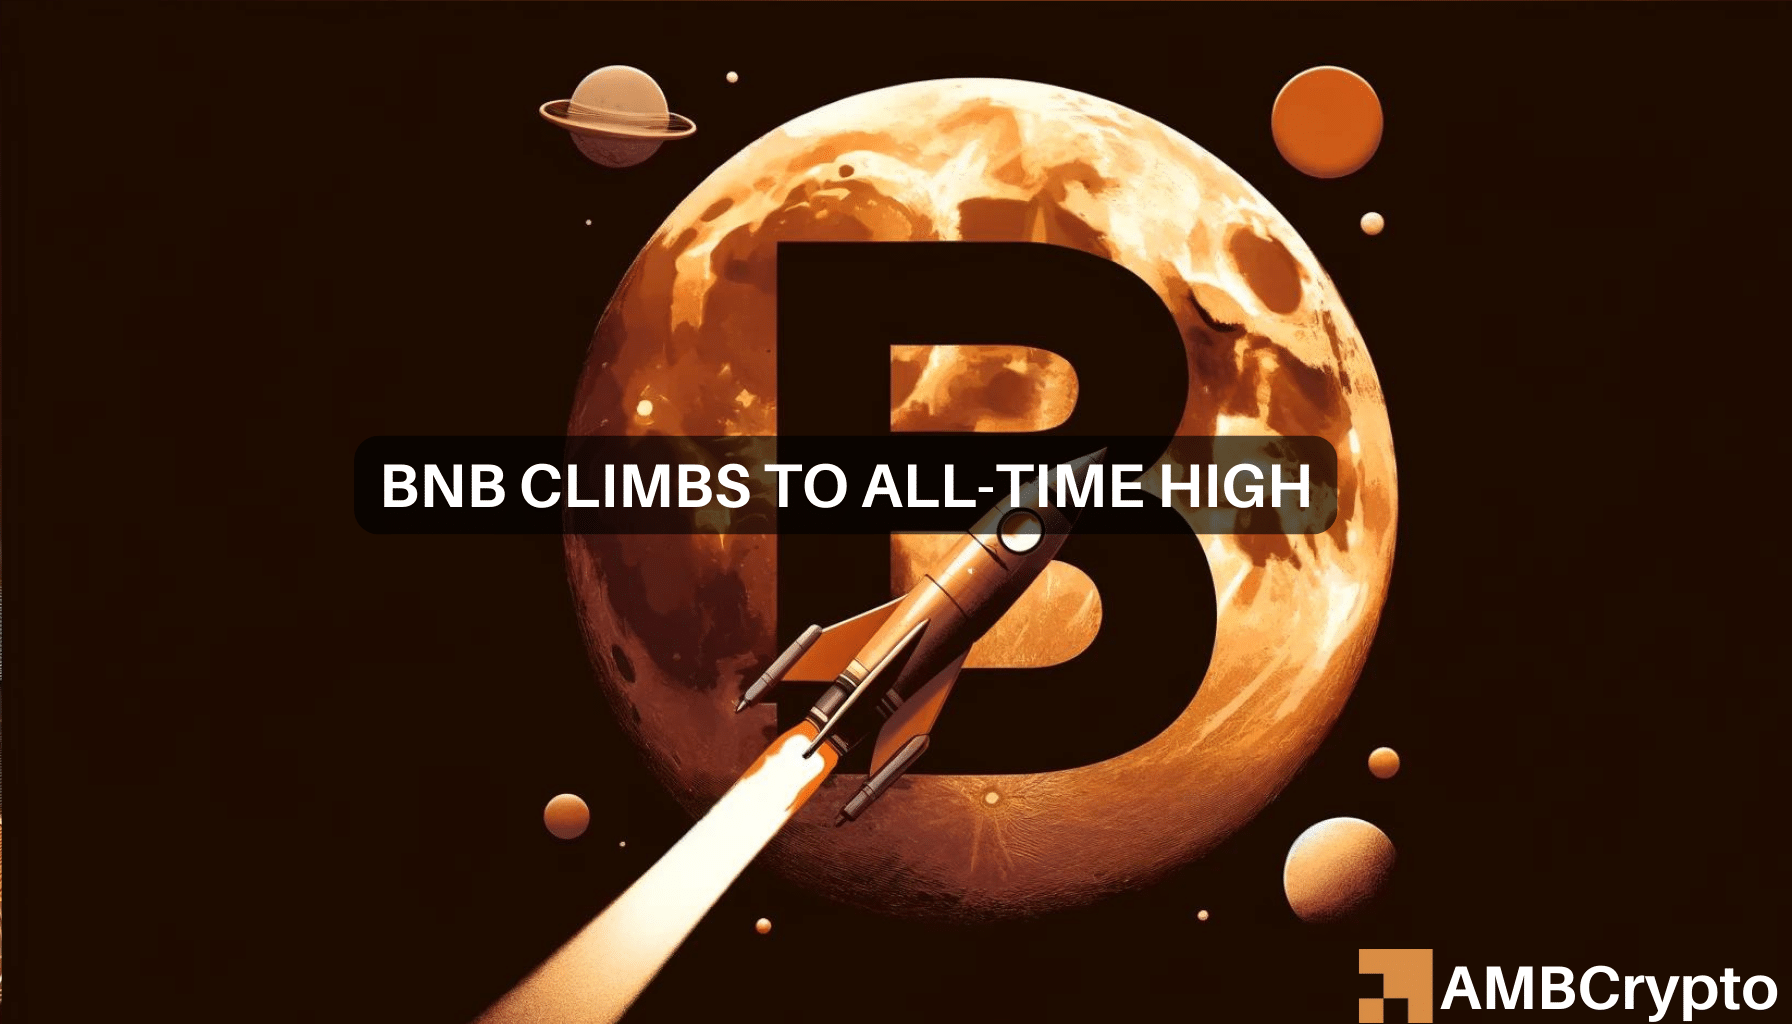 Binance Coin price hits ATH of $720: What’s next for BNB?